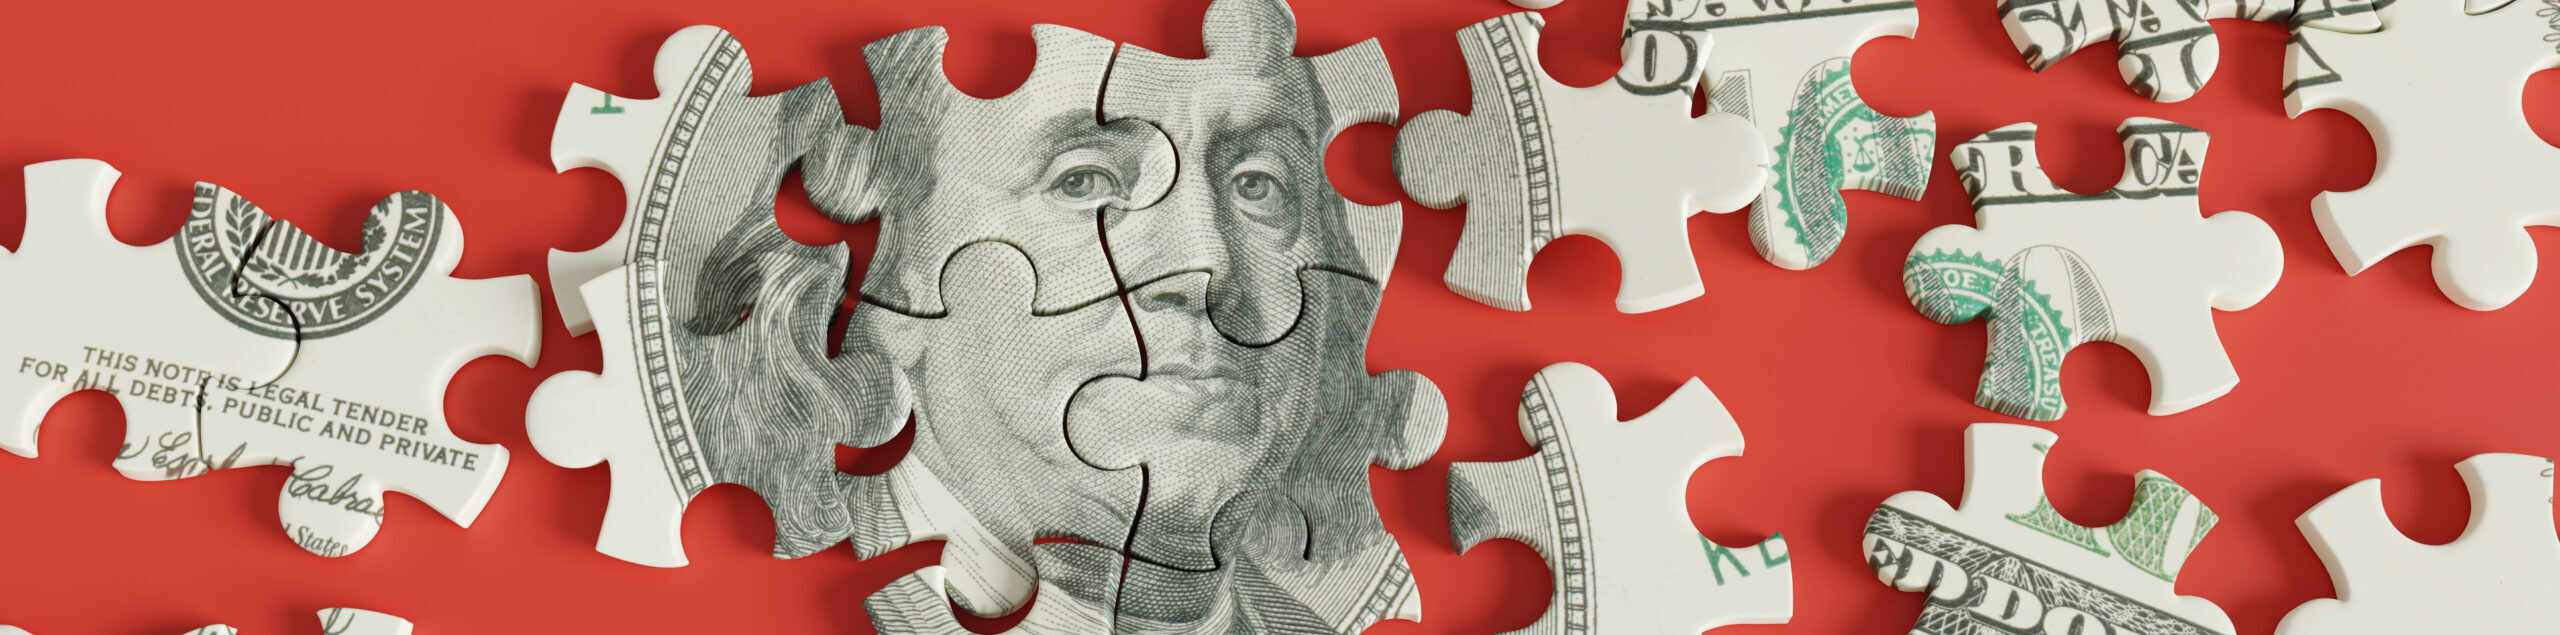 Jigsaw puzzle of US dollar 100 bill scattered on red background. Illustration of the concept of the crisis of US dollar dominant status